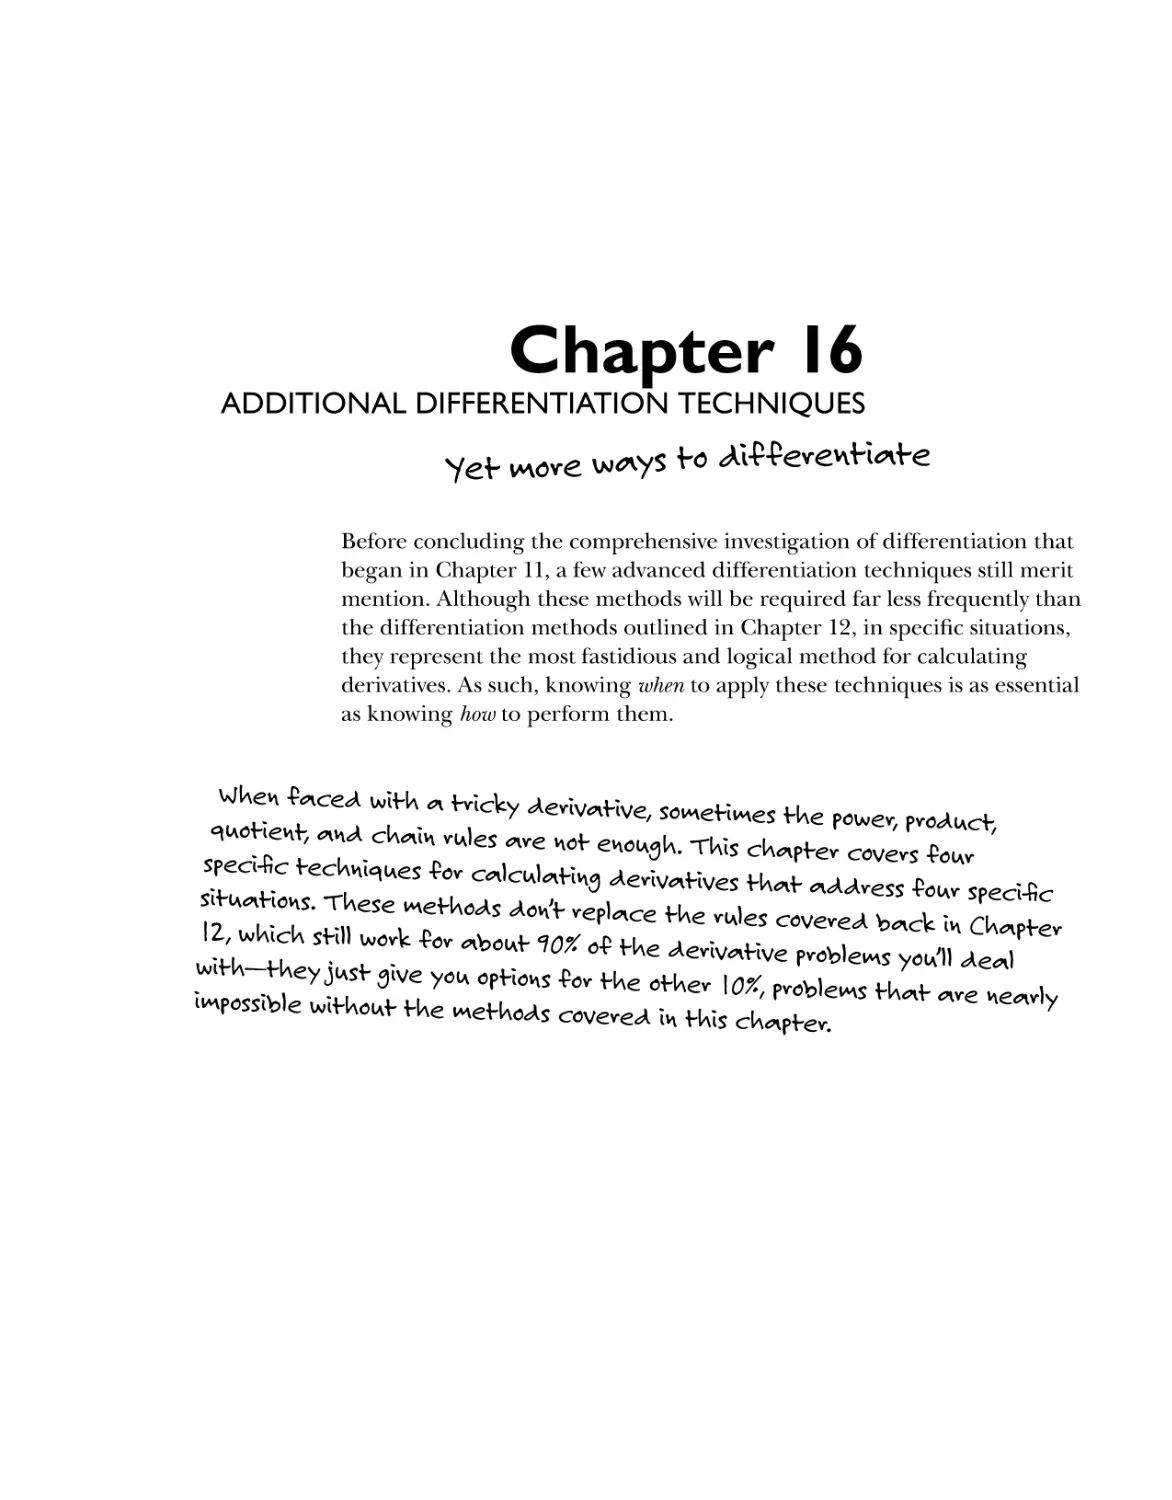 Chapter 16: Additional Differentiation Techniques 247